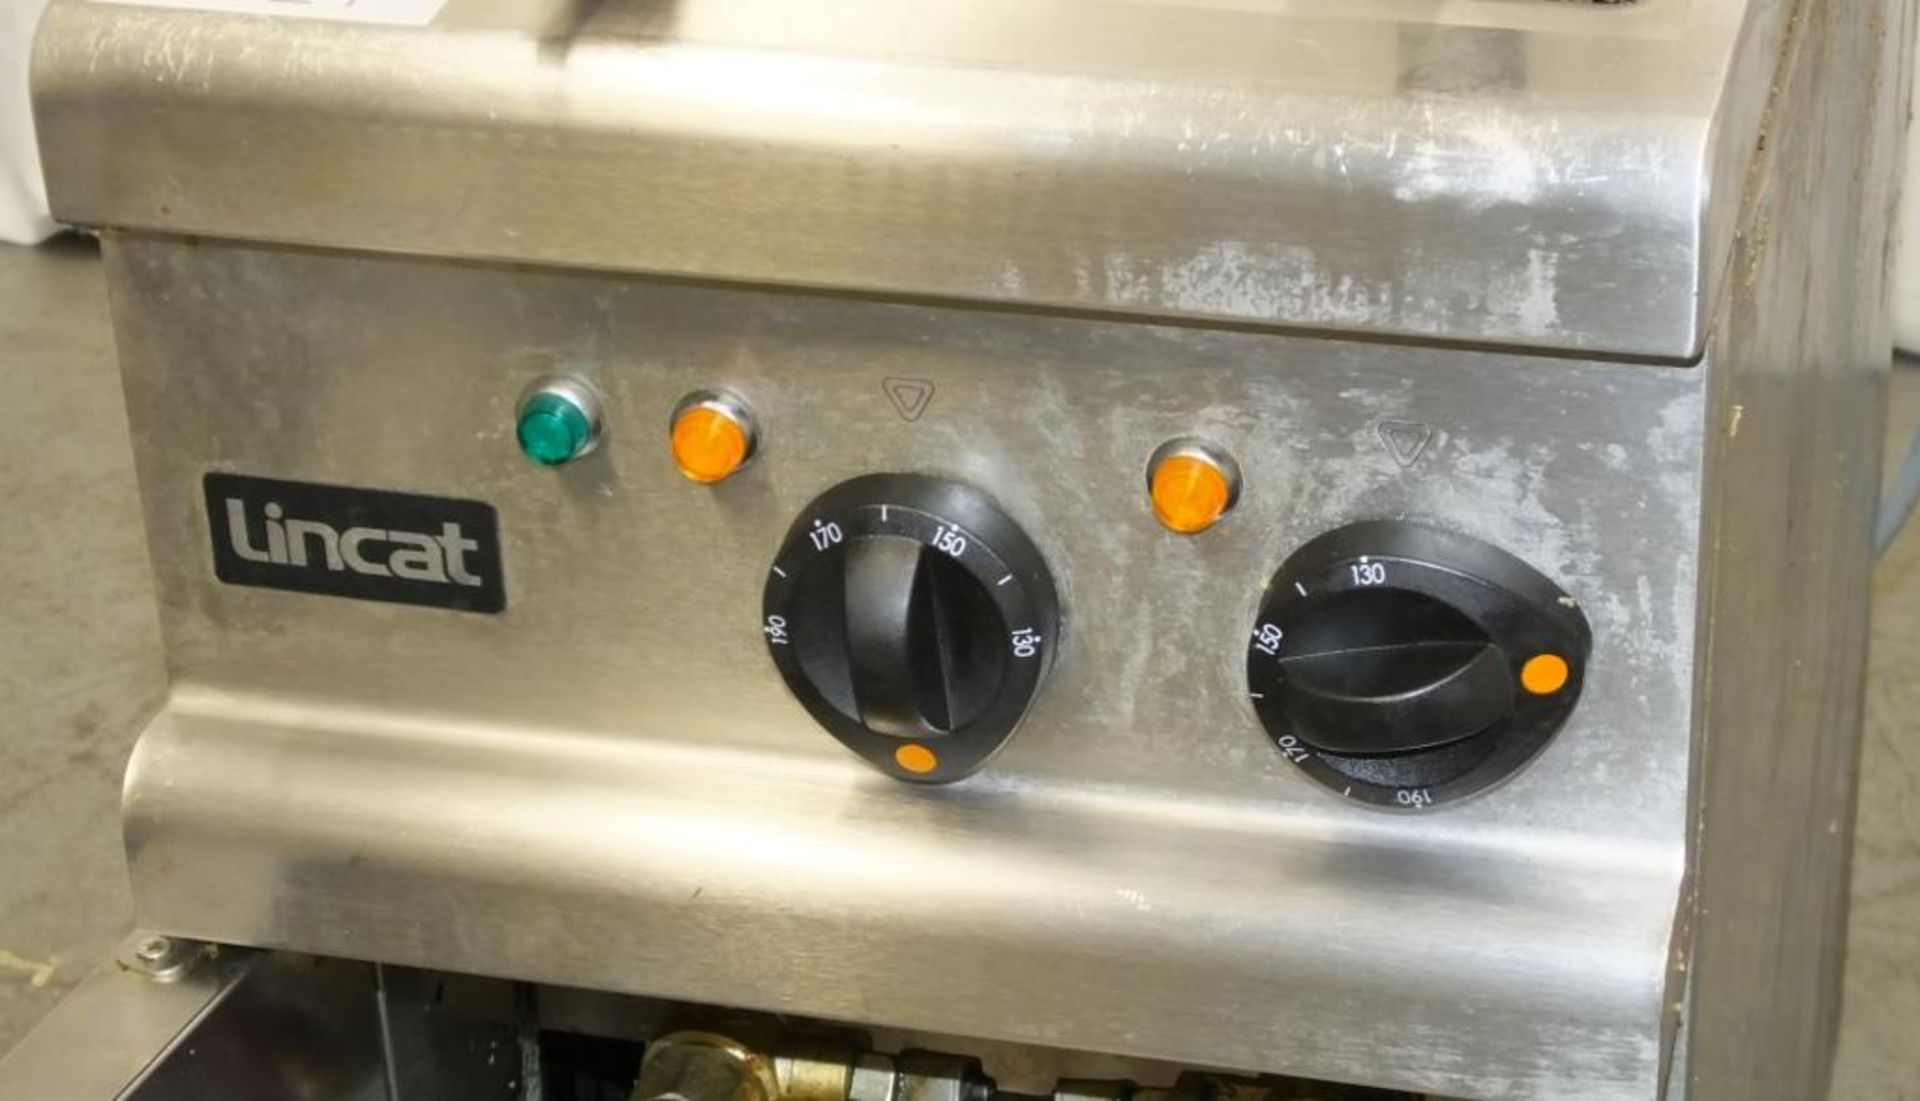 Lincat double basket fryer - OE7105/F - 415V - W 400mm x D 730 x H 930mm - Image 6 of 6